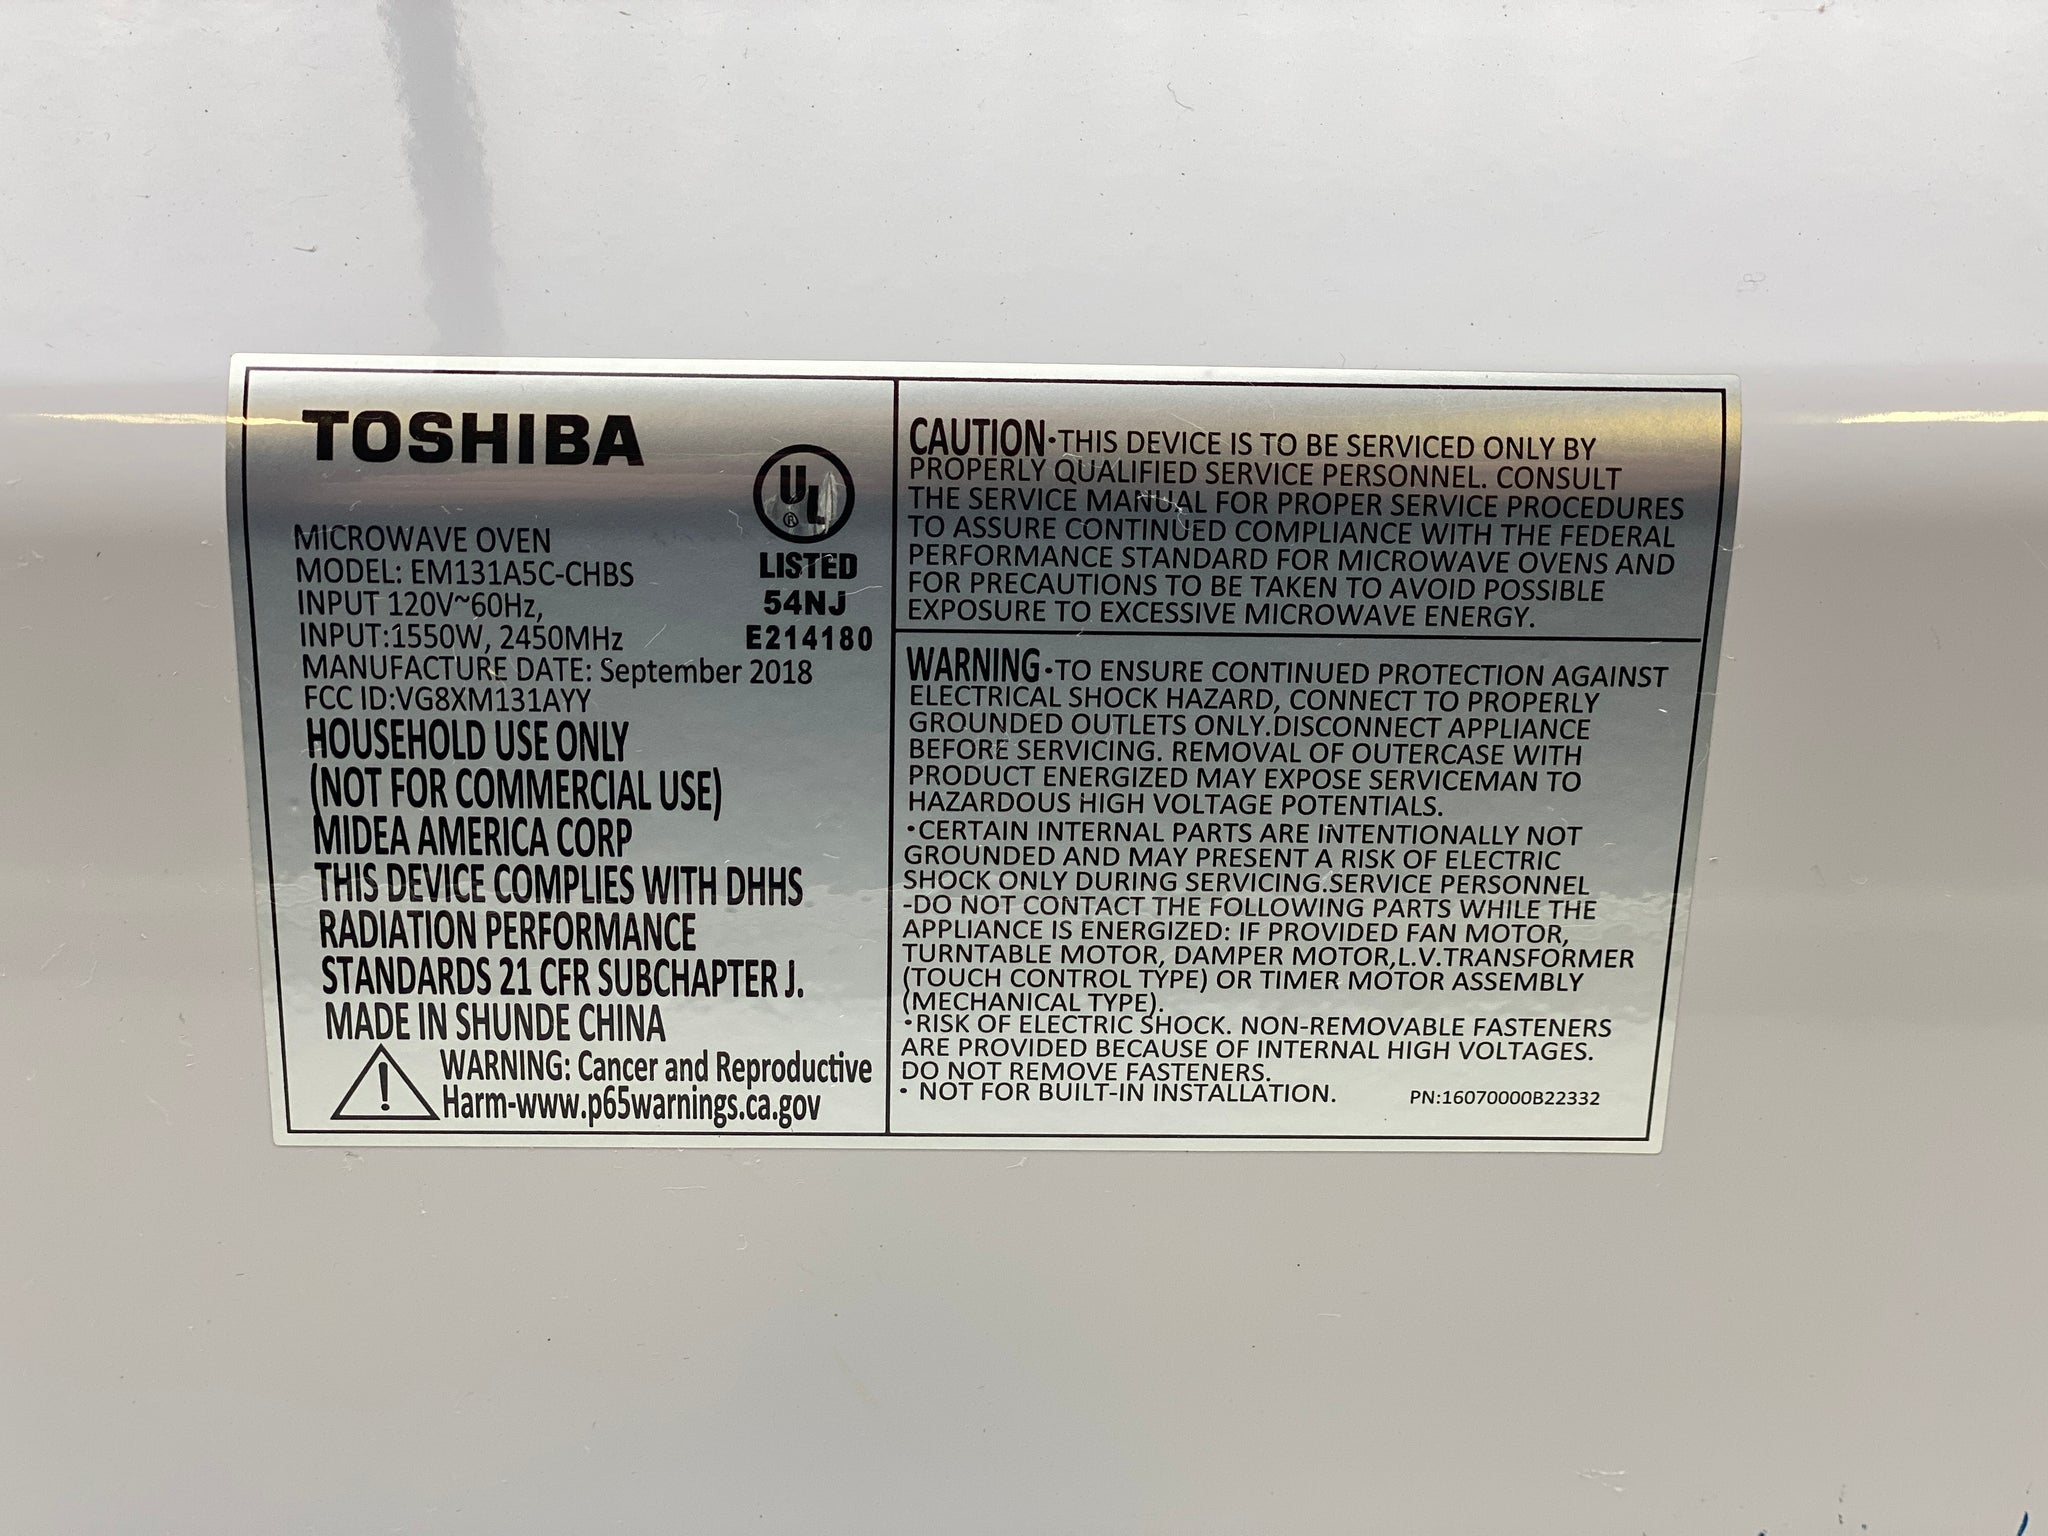 Toshiba EM131A5C-SS 1.2-cu. ft. Counter Top Microwave Oven, S.S.